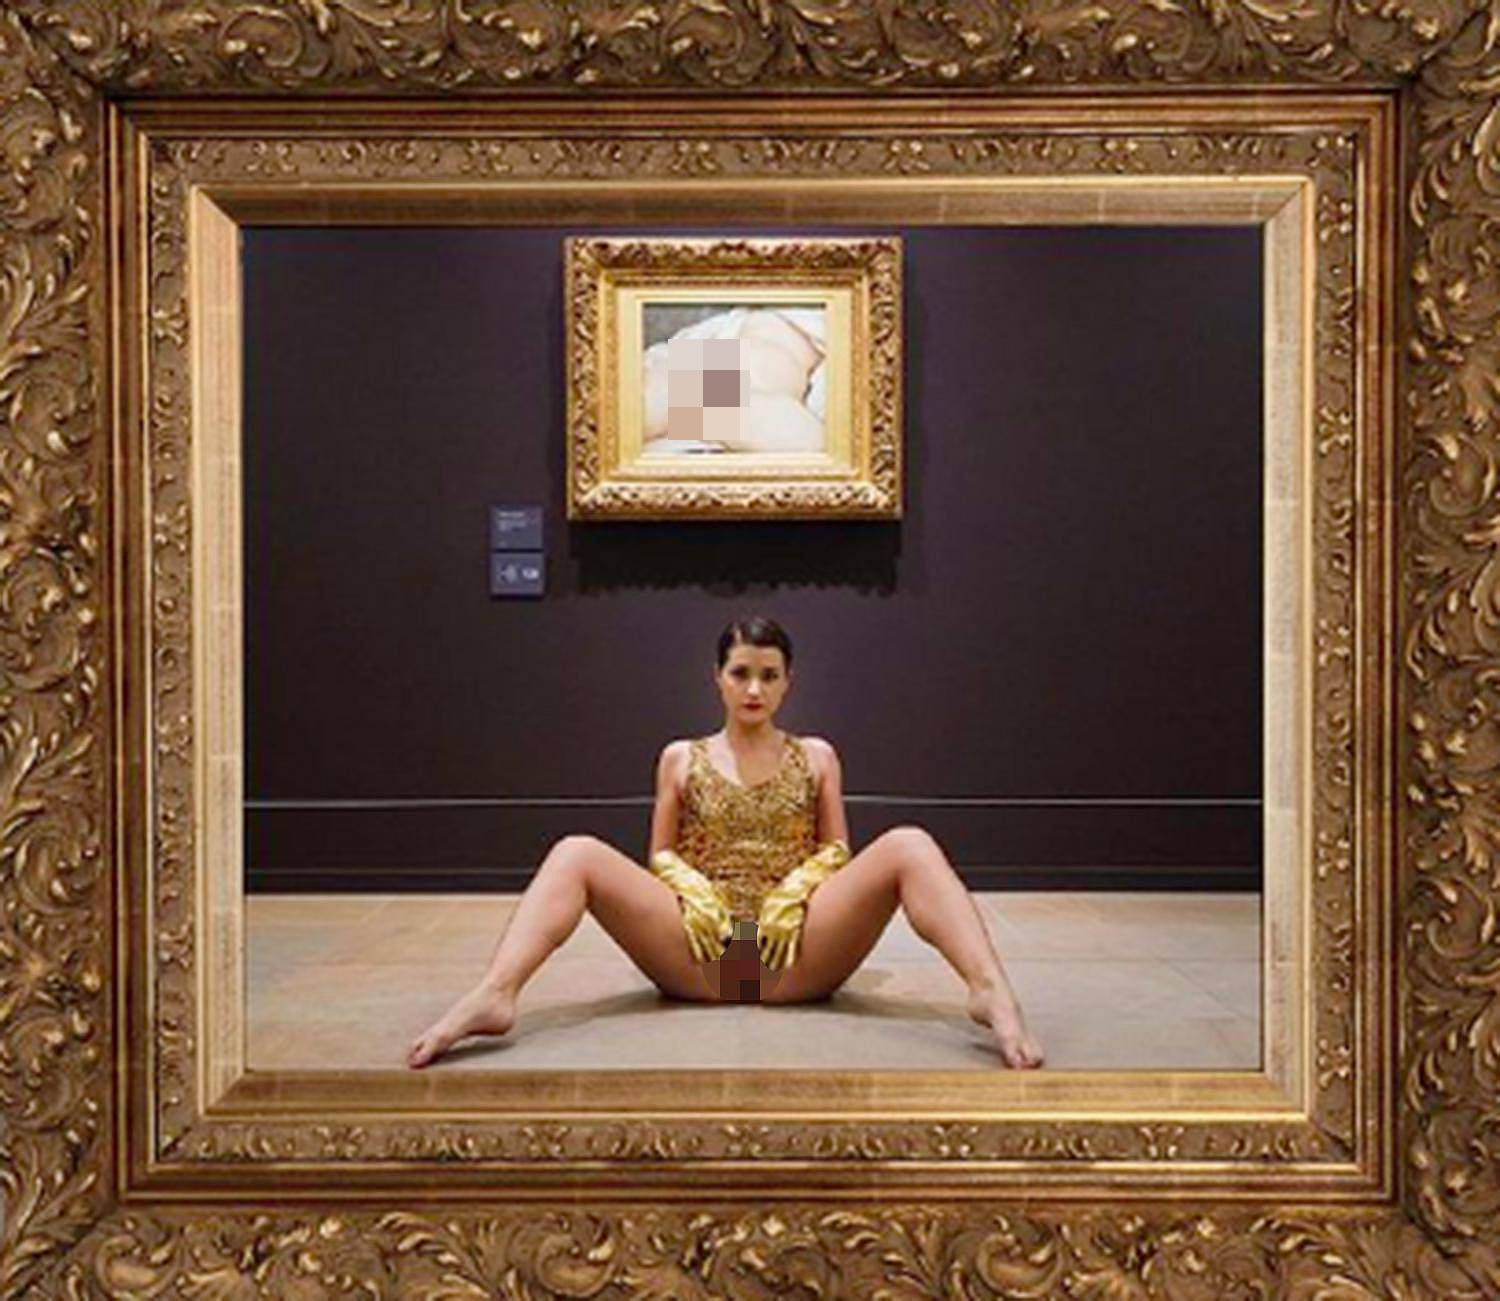 People in the Louvre where shocked to see a 33-year-old "performance artist" showing her lady parts in the popular Paris museum. It was not the first time the woman did this (as you can see on the picture), in May 2014 she exposed herself in front of Gustave Courbet’s “The Origin of the World” painting, at the Orsay Museum, to "mimic the close-up of a woman’s genitals shown on the painting".  She had no legal problems then.